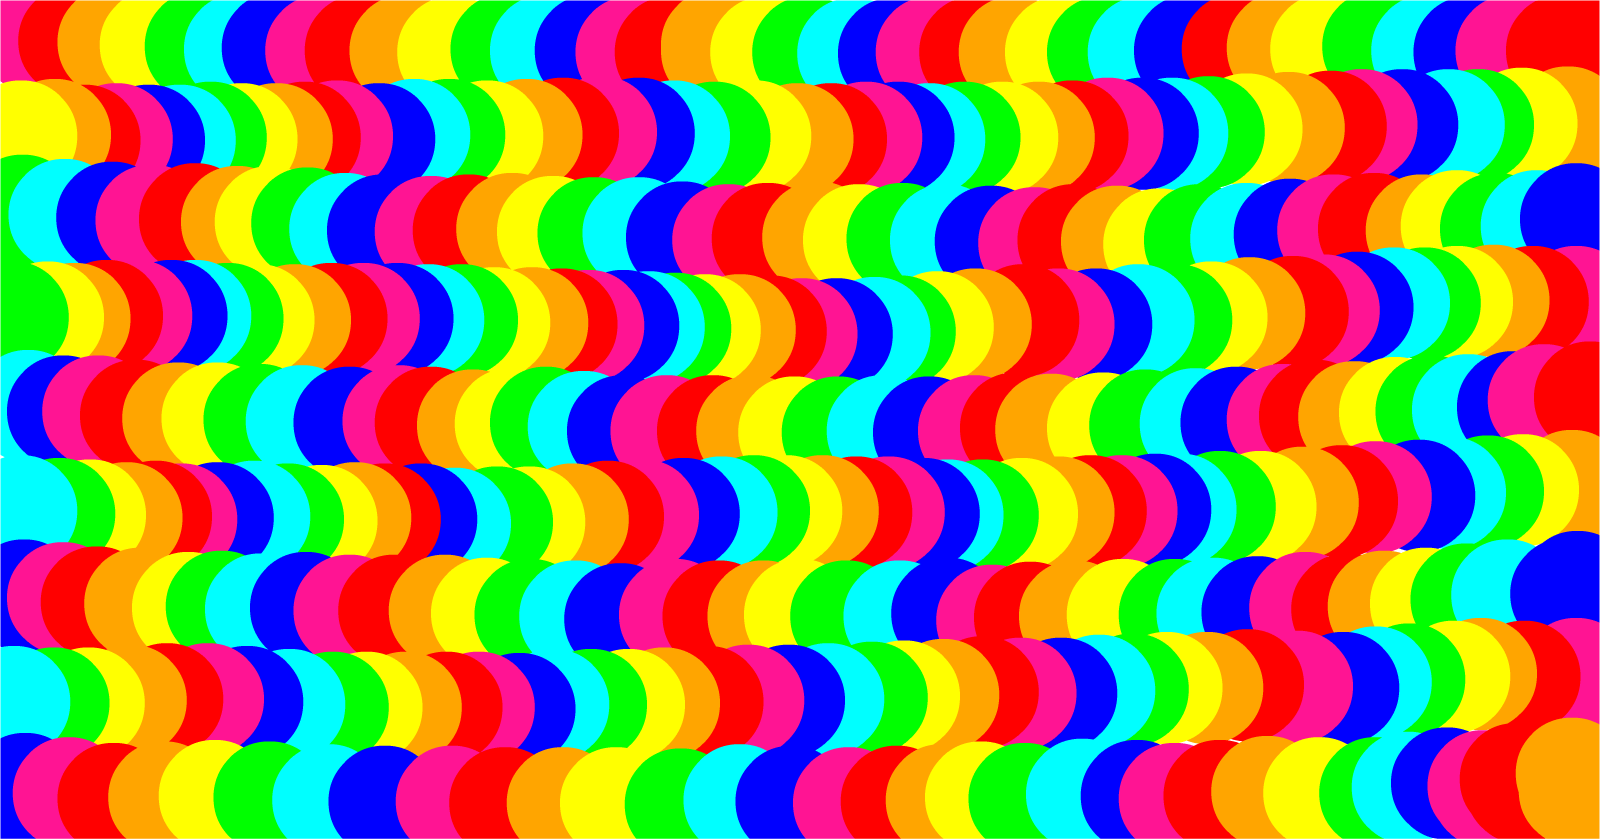 Rainbow Illusions Wallpapers - Wallpaper Cave